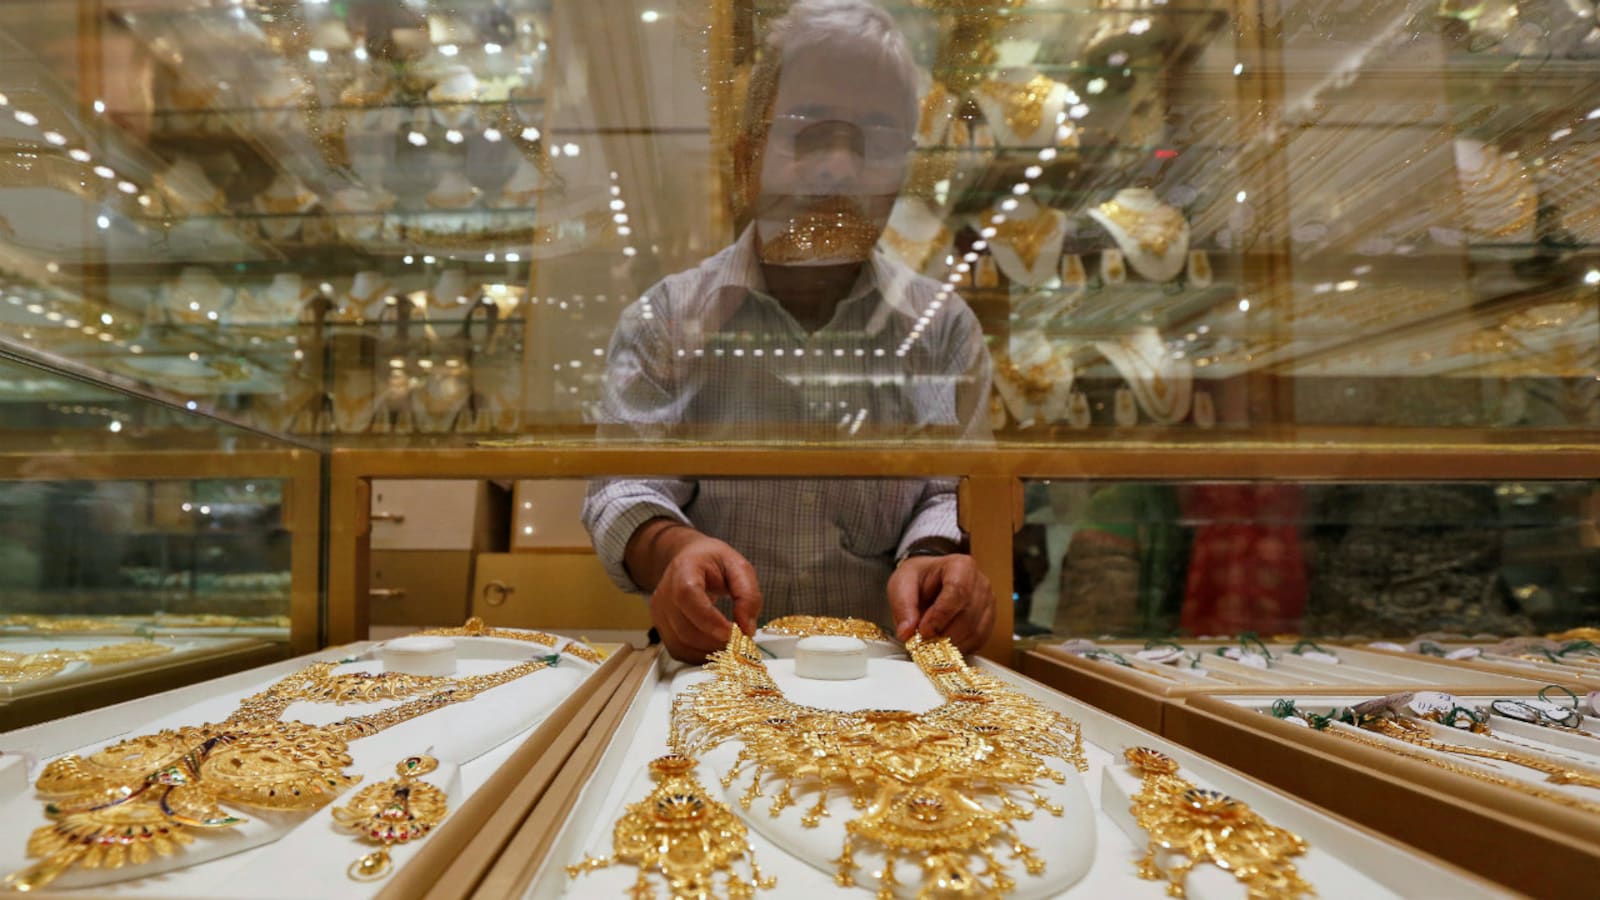 India's gems & jewellery exports may fall 10-15% this fiscal: GJEPC